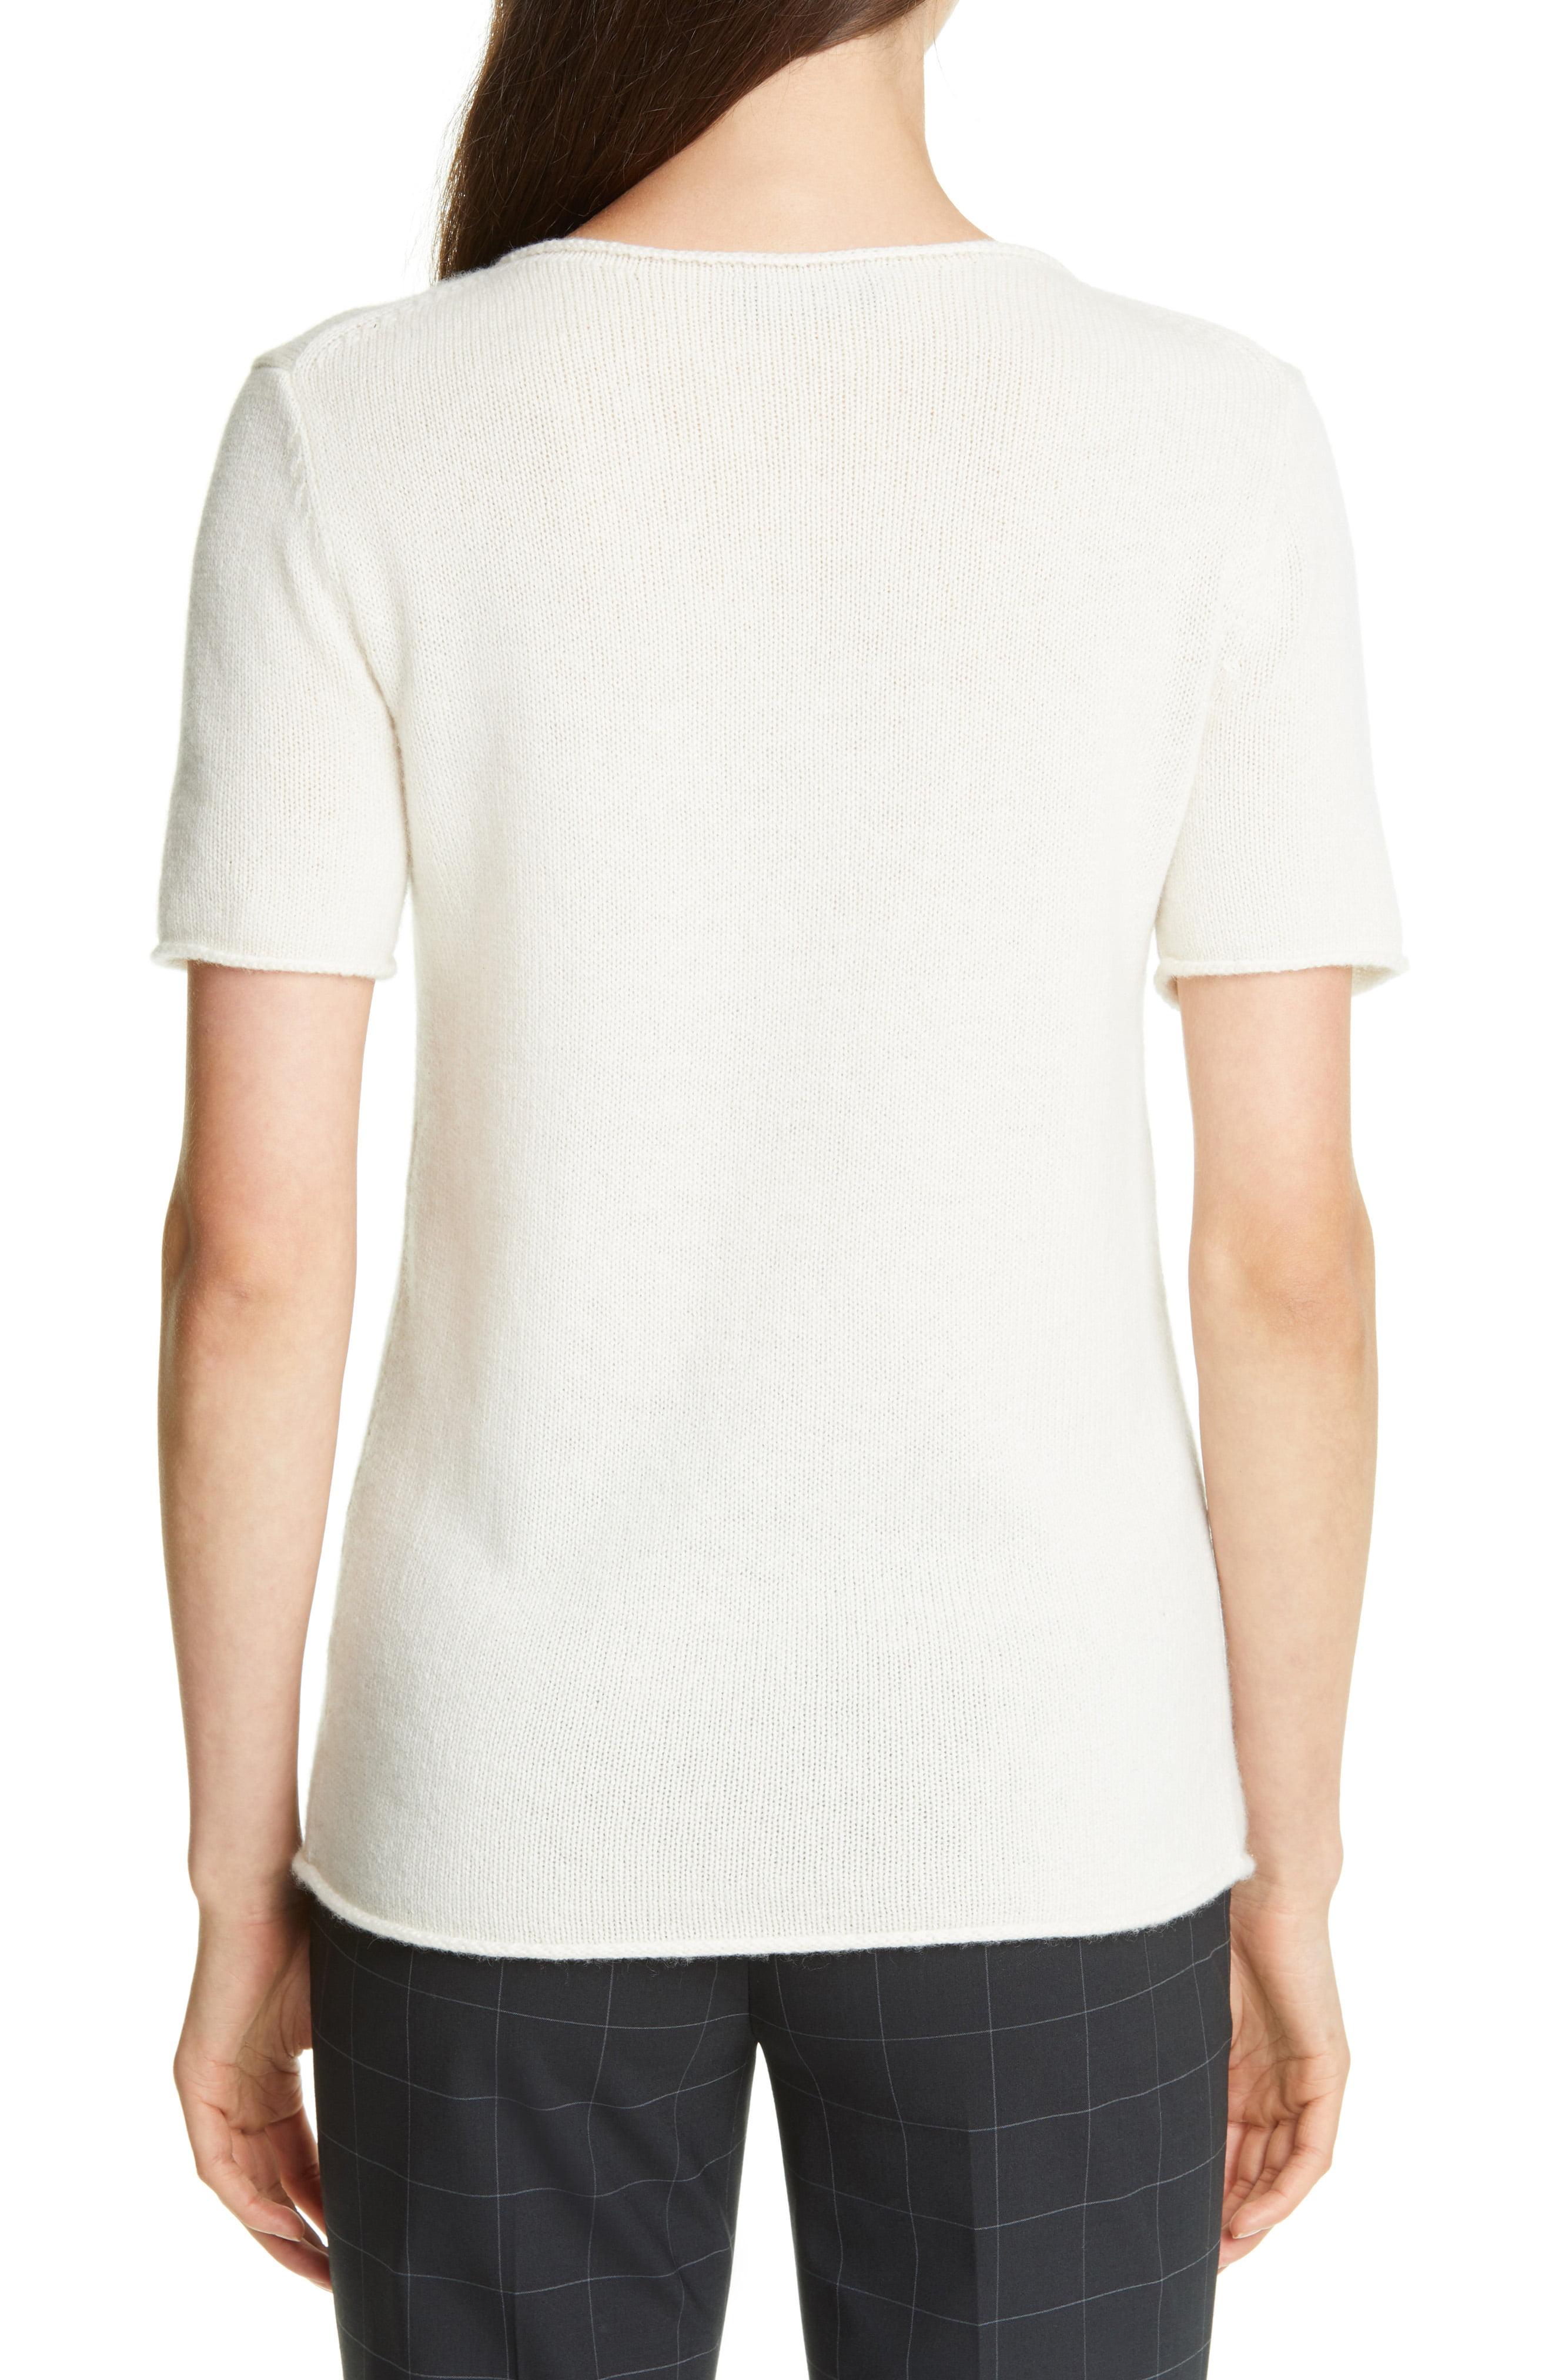 Theory Tolleree Short Sleeve Cashmere Sweater in Ivory (White) - Lyst